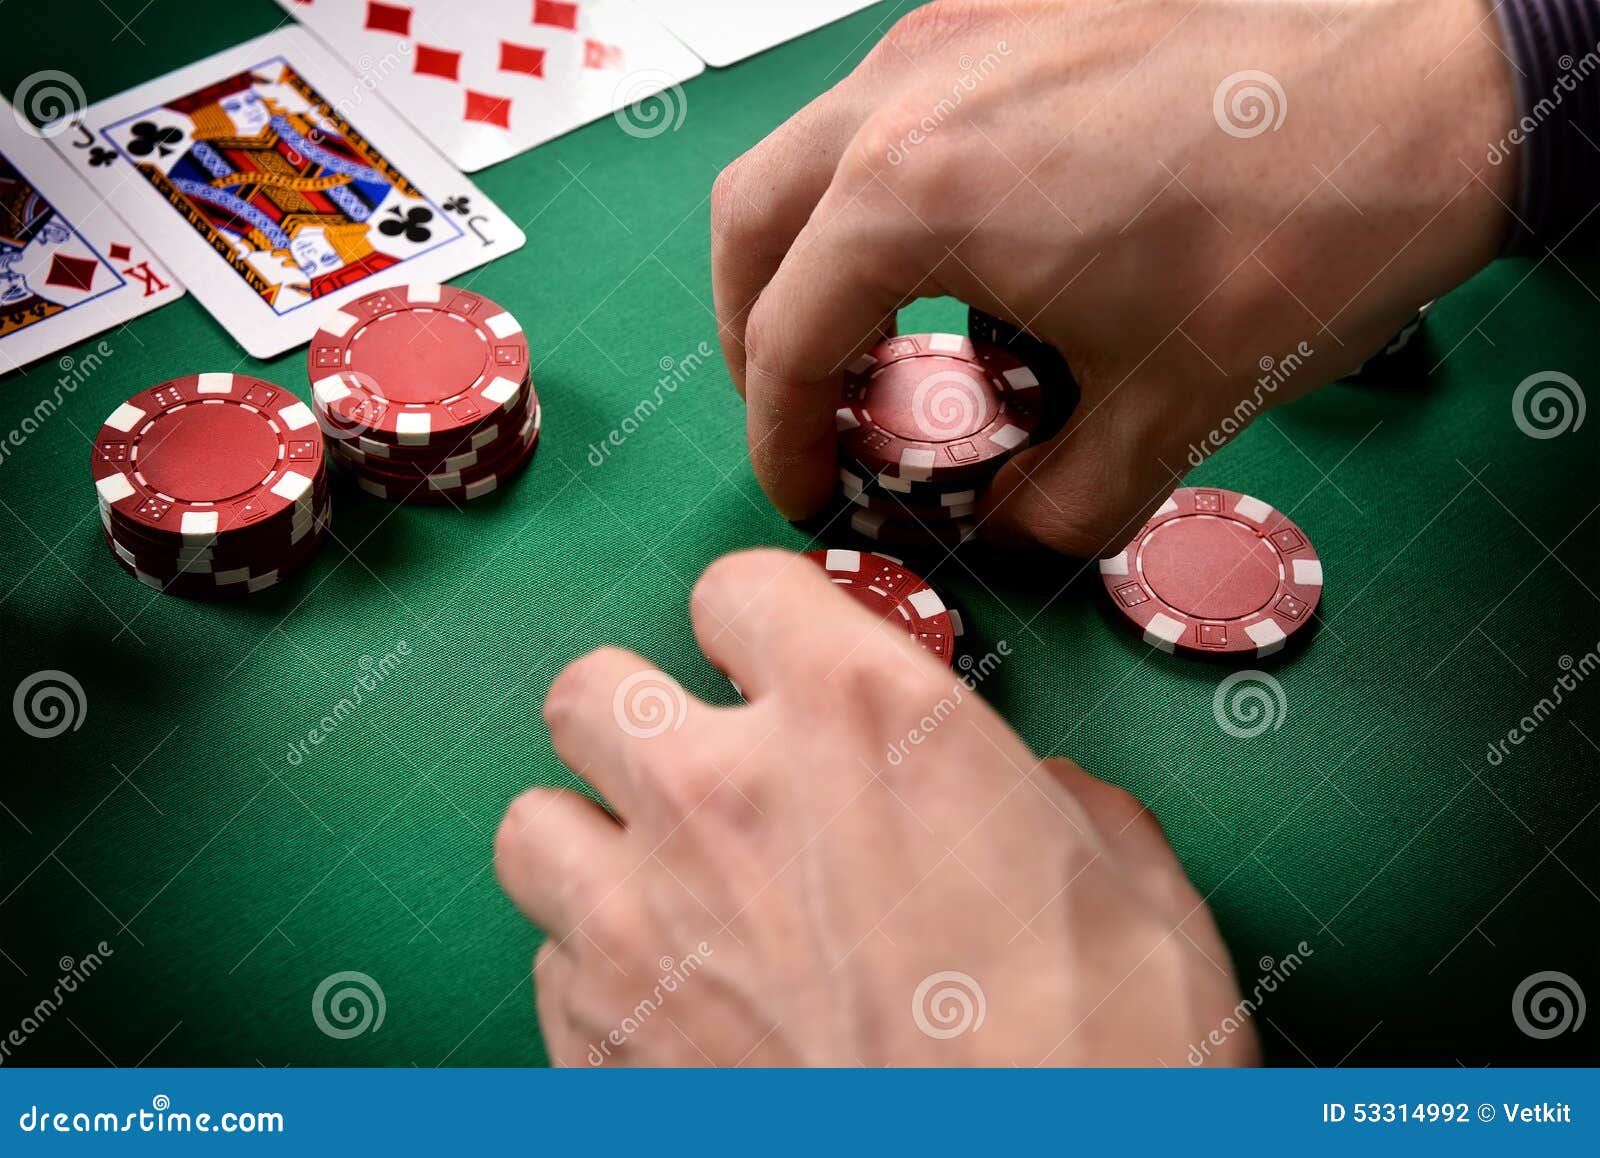 Dealer collects red poker chips from the table